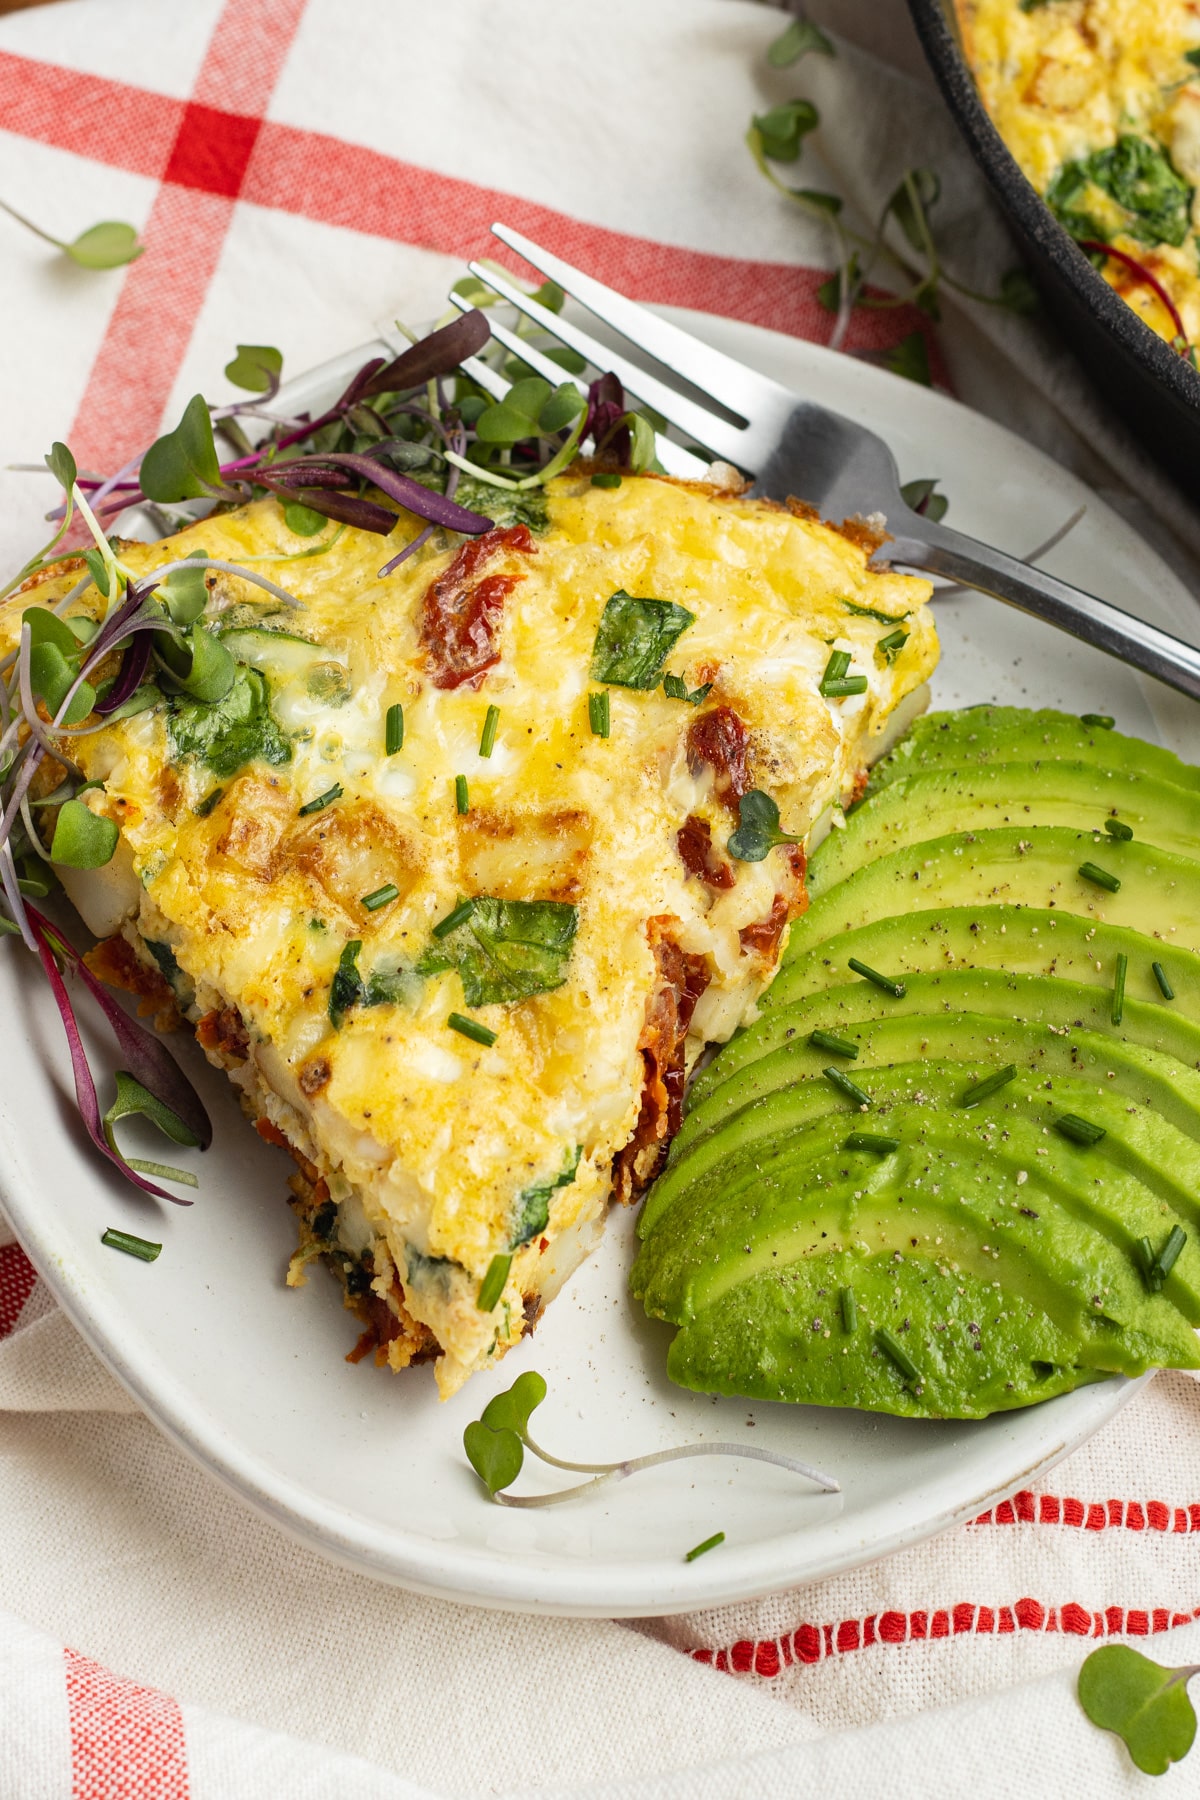 This is a picture of a slice of frittata with avocado on the side.